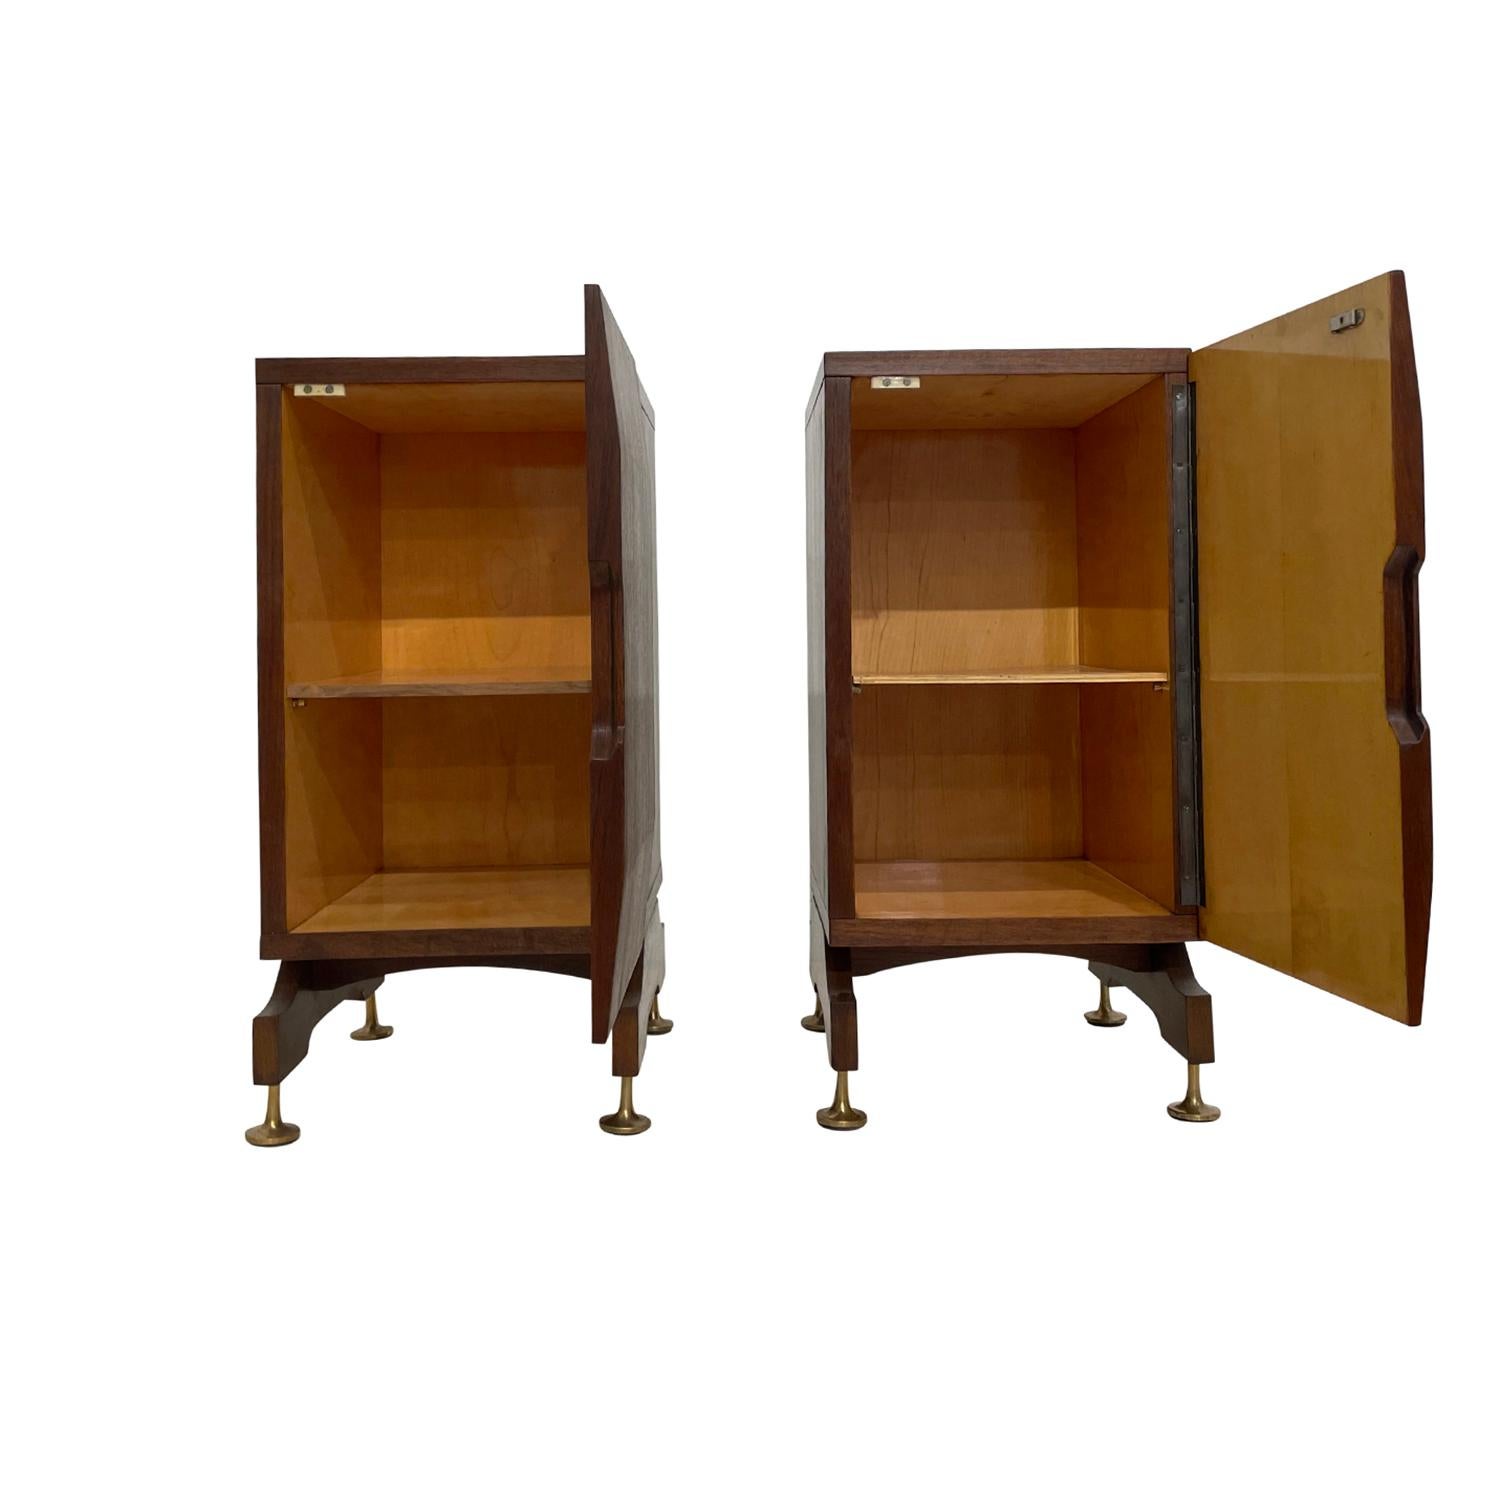 Polished 20th Century Italian Mid-Century Pair of Walnut Nightstands, Vintage Side Tables For Sale